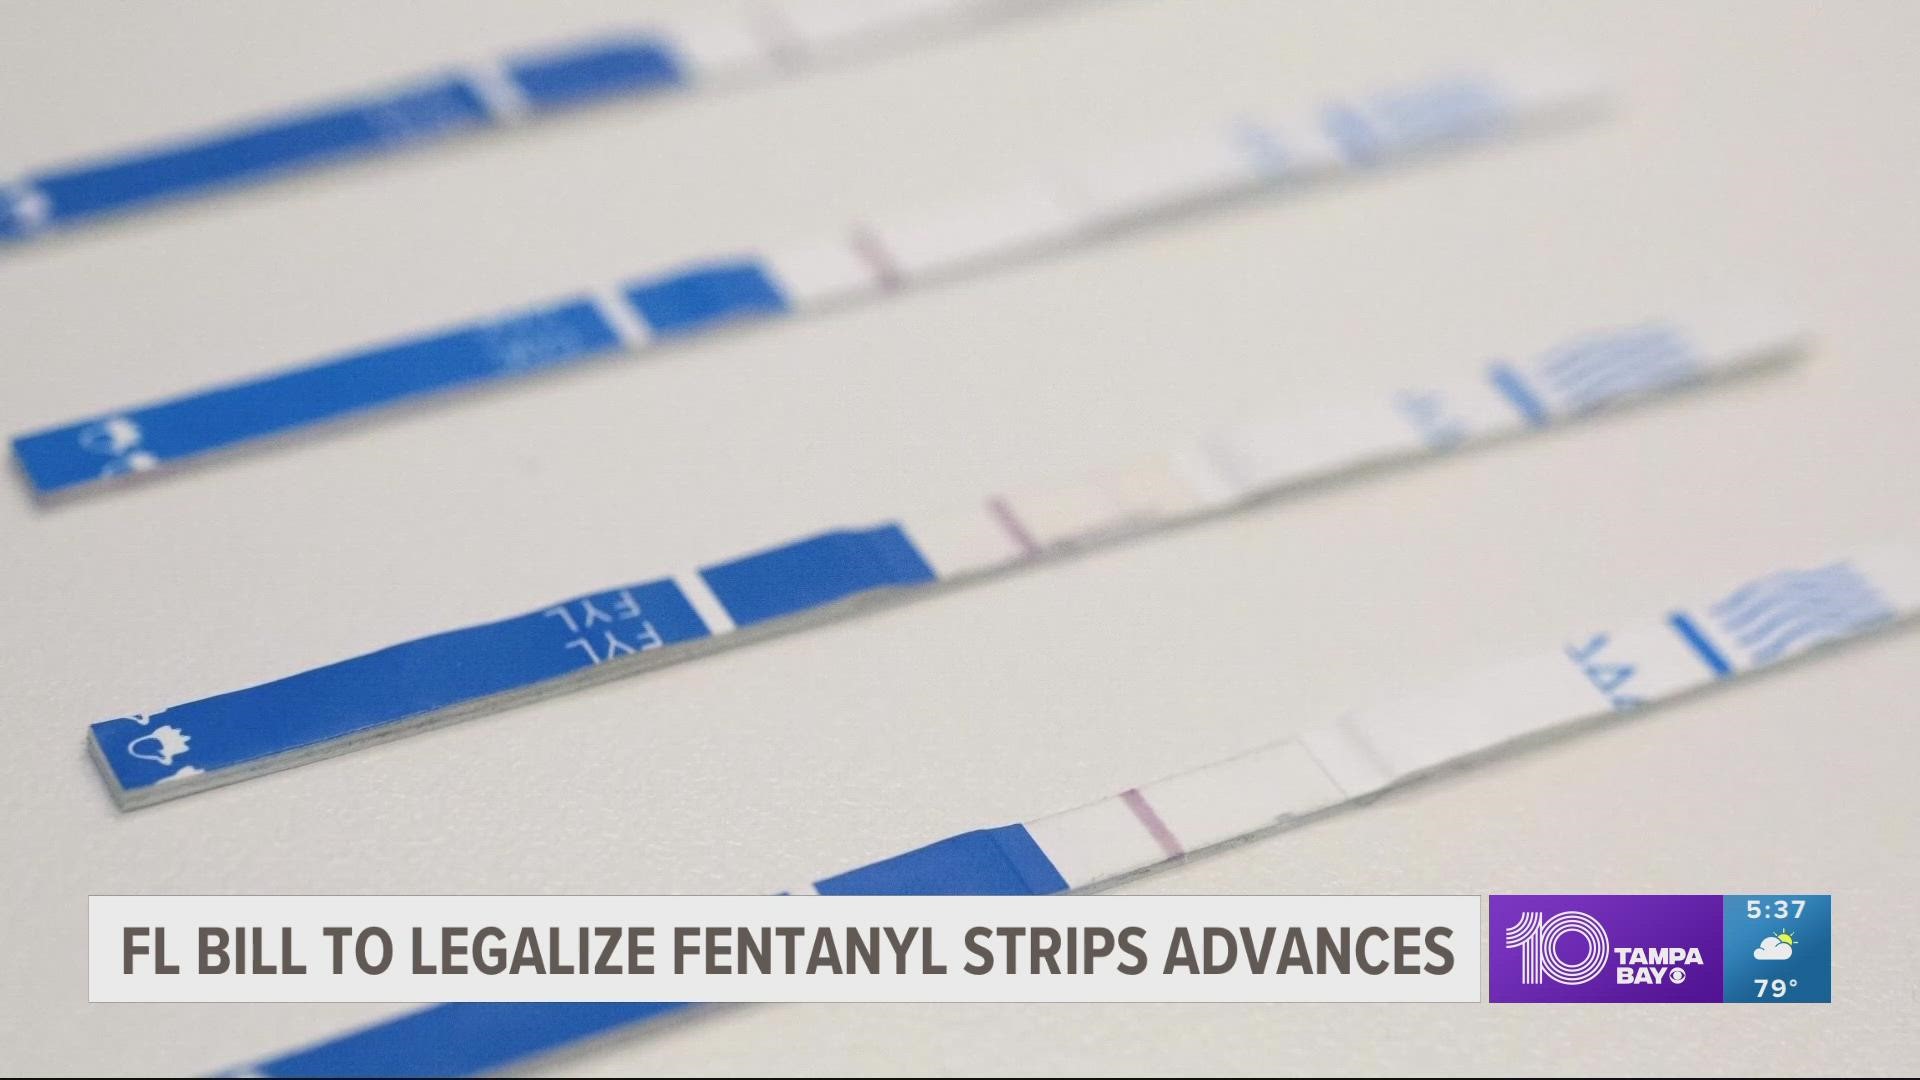 With fentanyl being laced into so many drugs, test strip kits could warn a user within minutes that the drug has fentanyl in it.